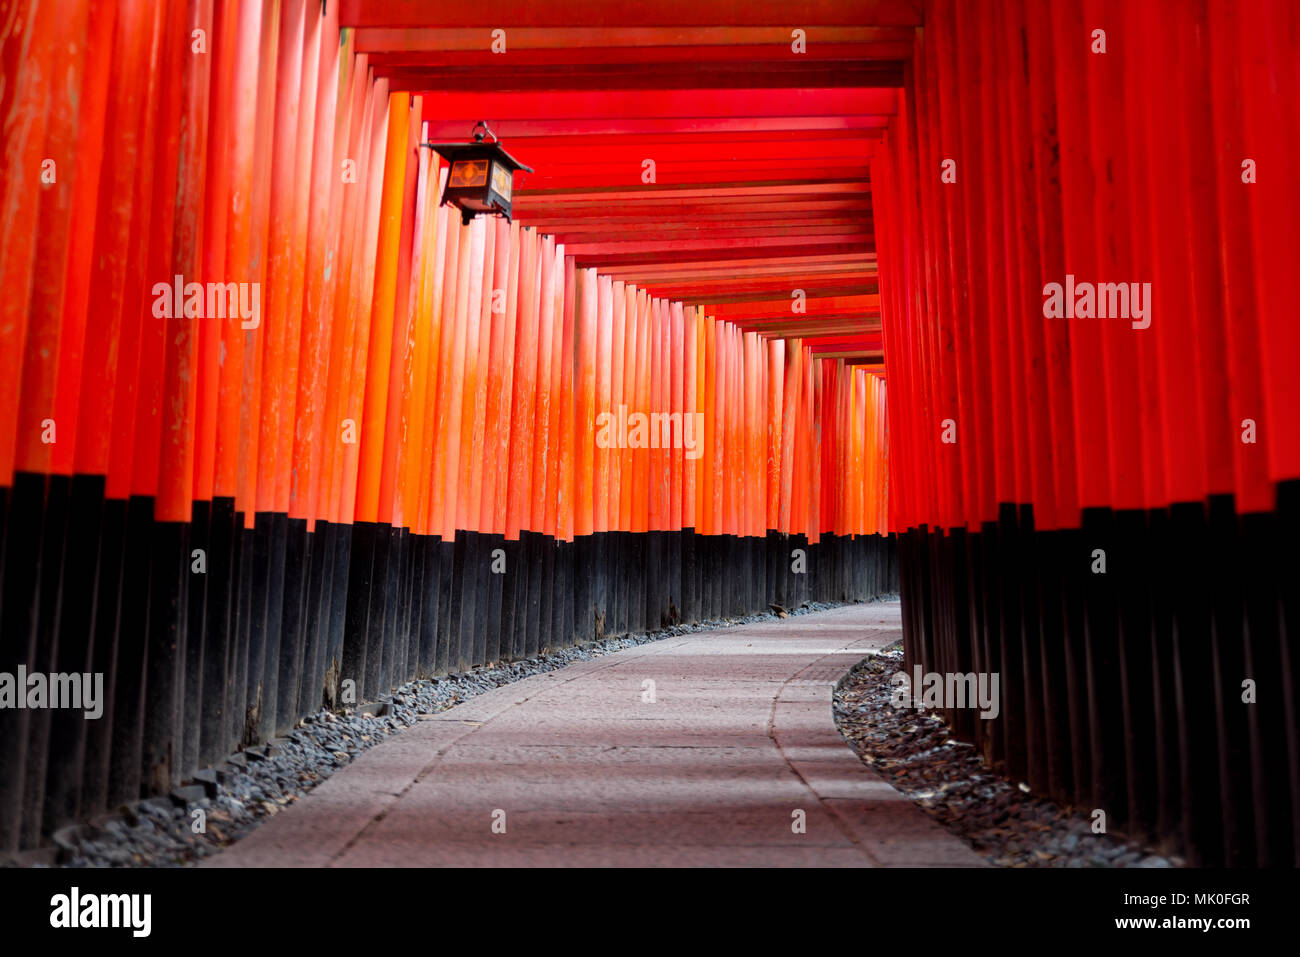 Fushimi Inari shrine in Kyoto, Japon Banque D'Images